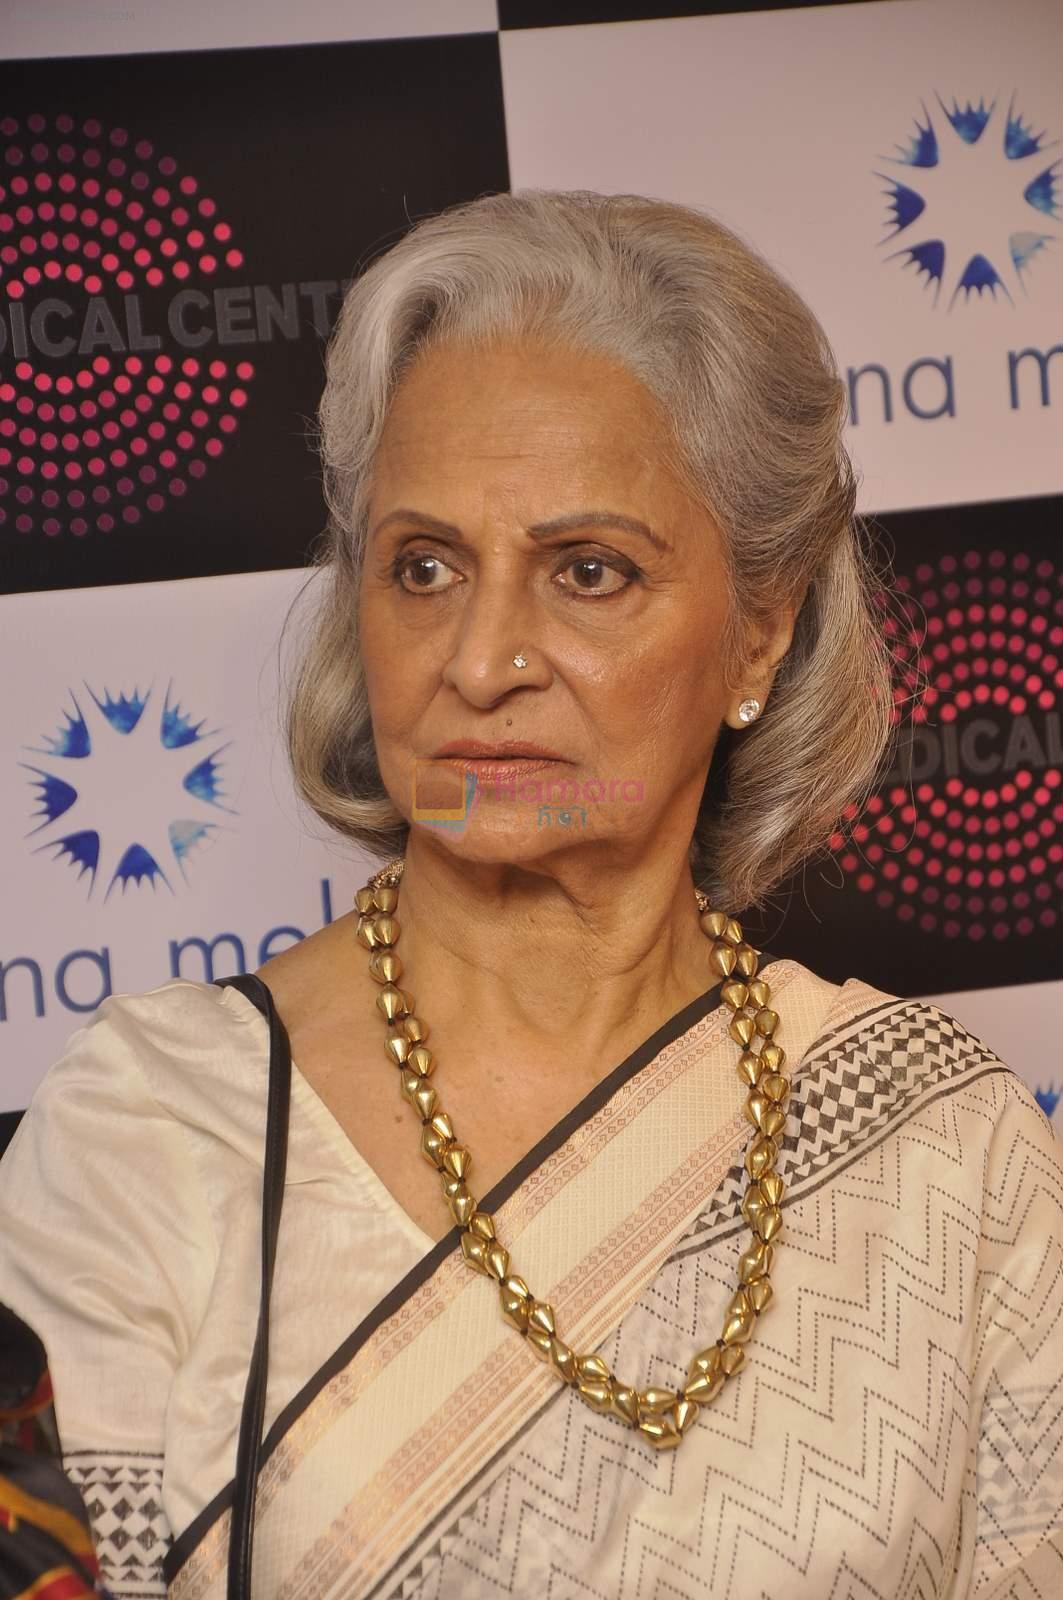 Waheeda Rehman at Krishna Mehta's store in association with Tata Medical Center in Chowpatty on 10th July 2015